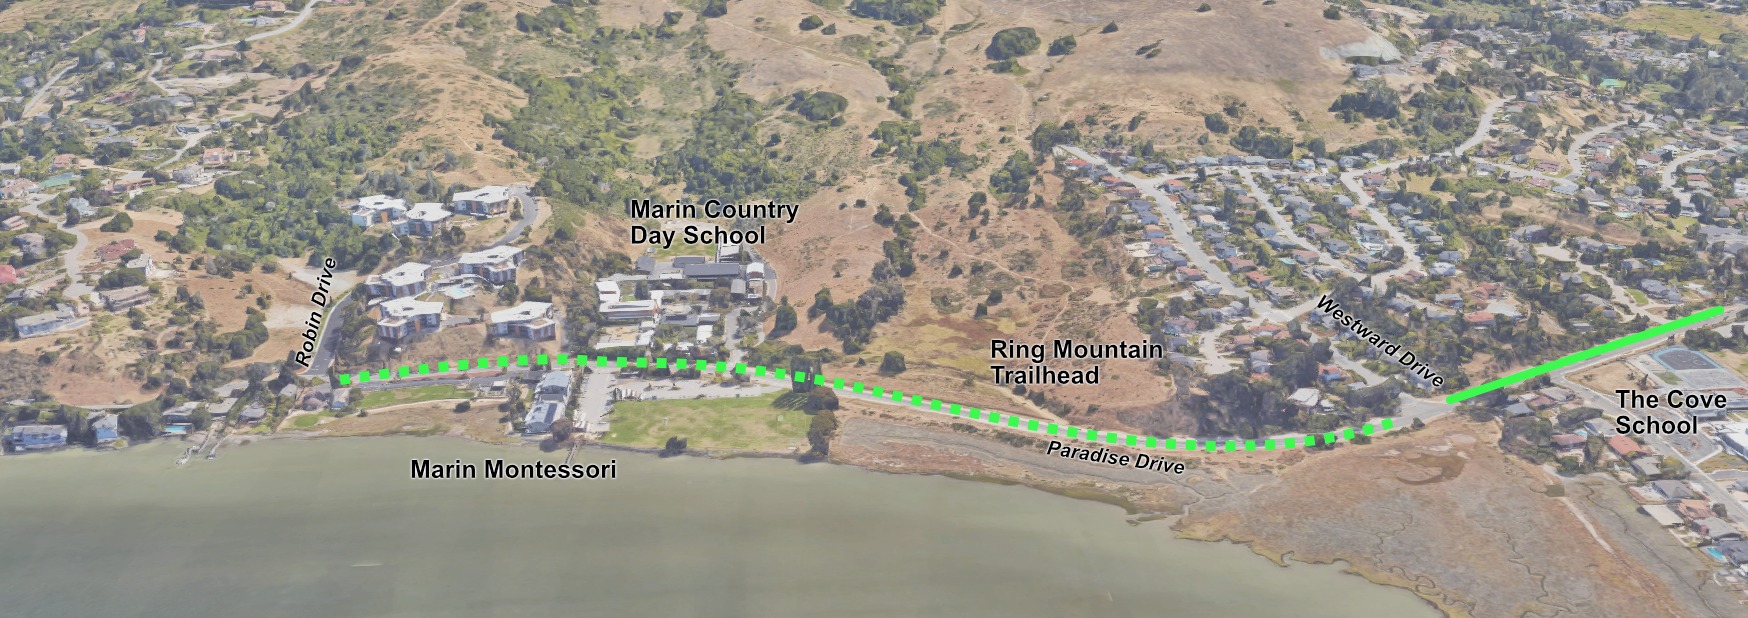 $20M for Bike Projects in Marin